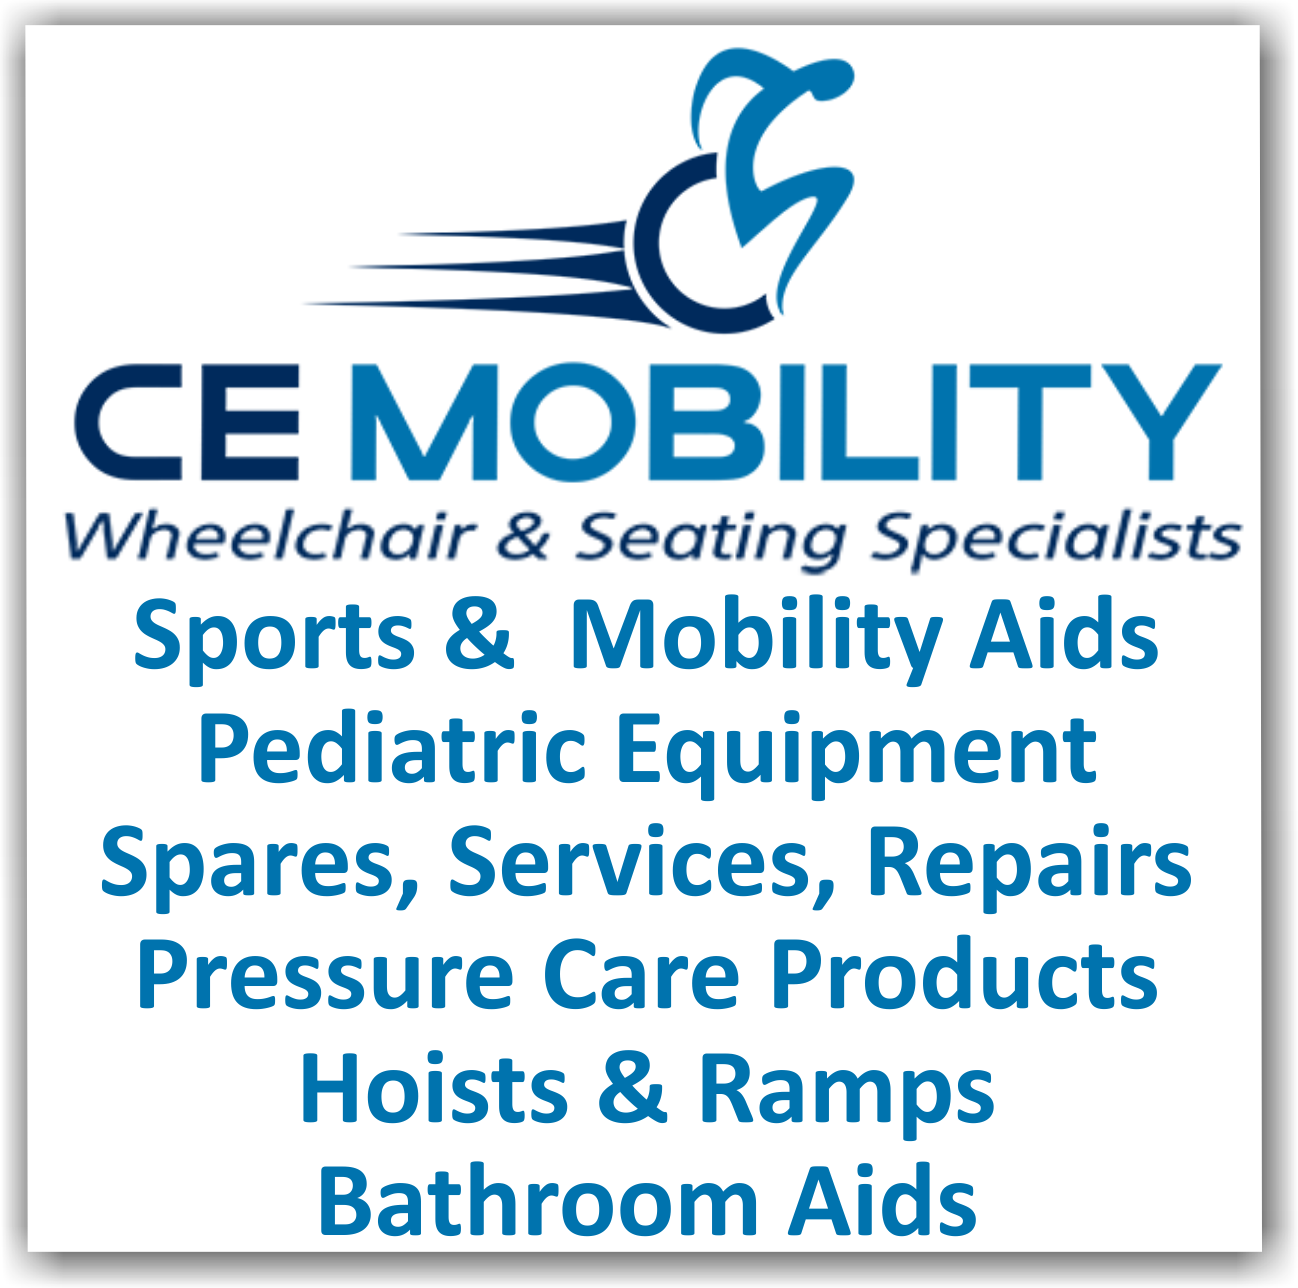 CE Mobility